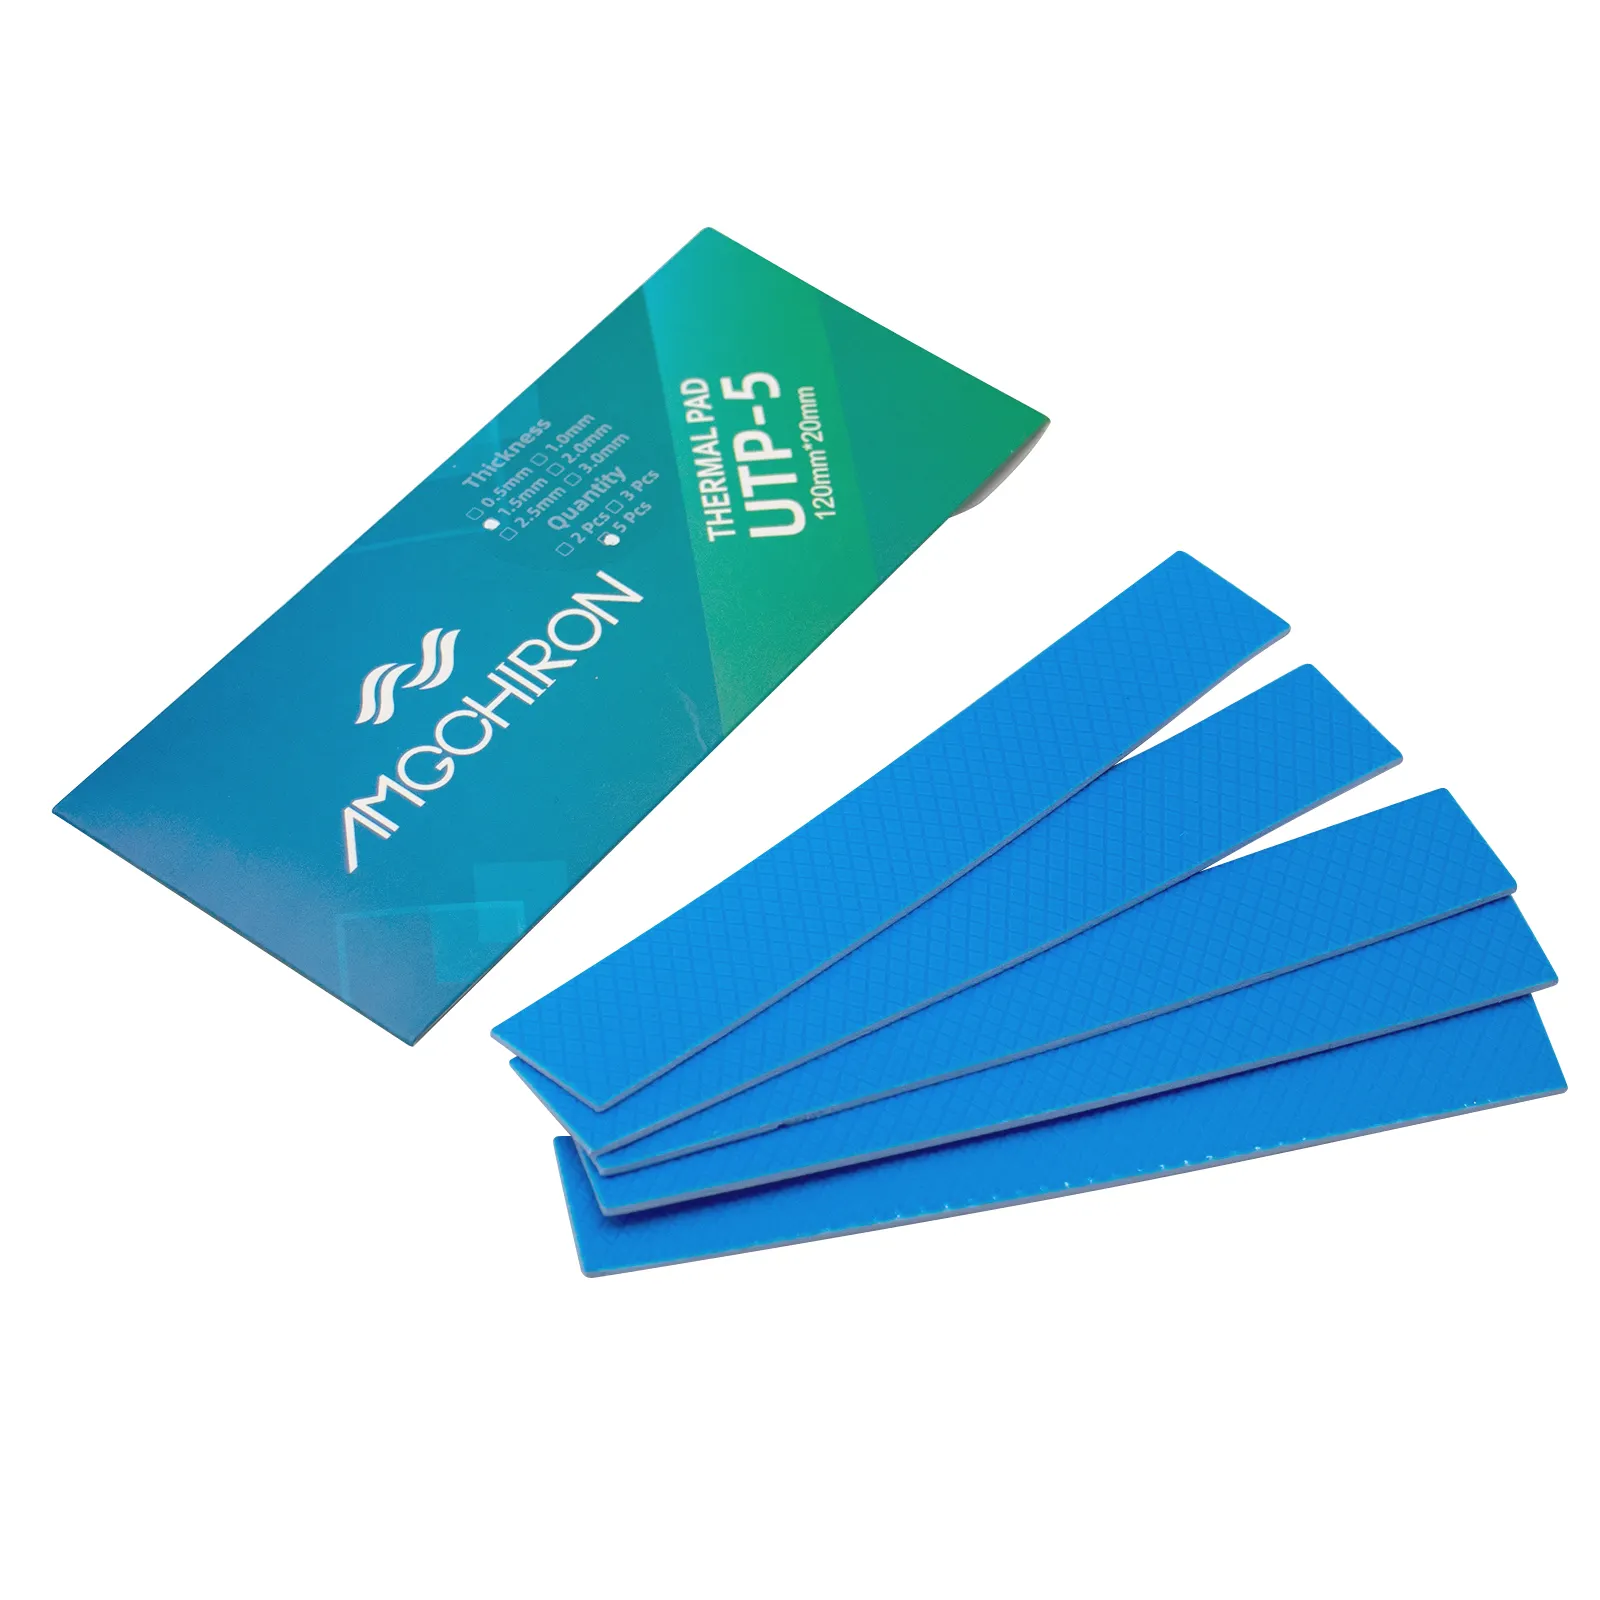 Insulation Materials Elements Pad With 1W 2W 3W 6W 8W 10W 12W 0.25~20mm Thick Thermal Silicone Pad Insulator